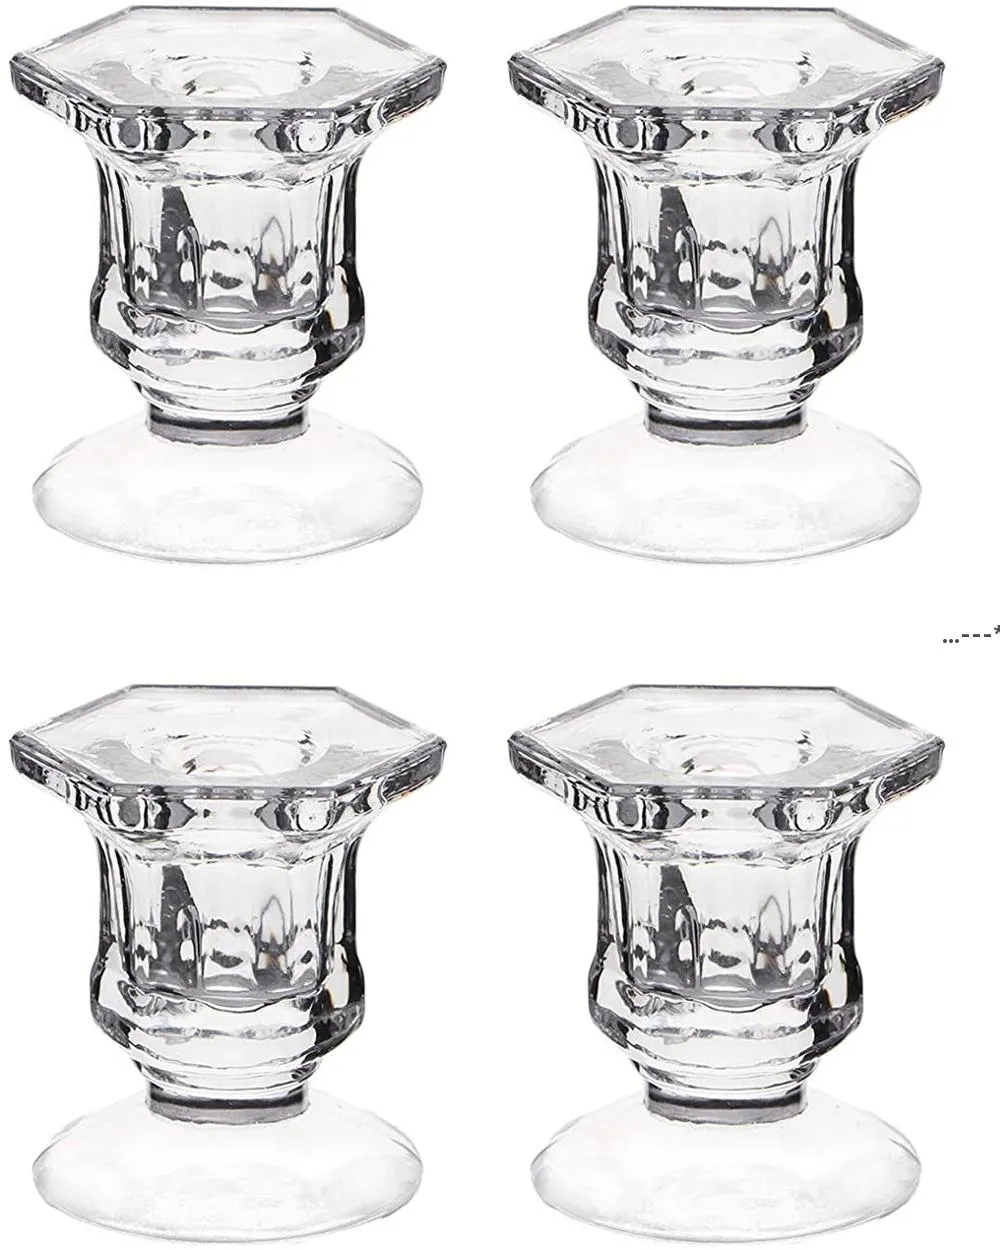 NEWTaper Candle Holder, Glass Centerpiece Clear Candlestick Holders Fit 3/4" Decorative Stand 2.3" Height for Table Wedding Party